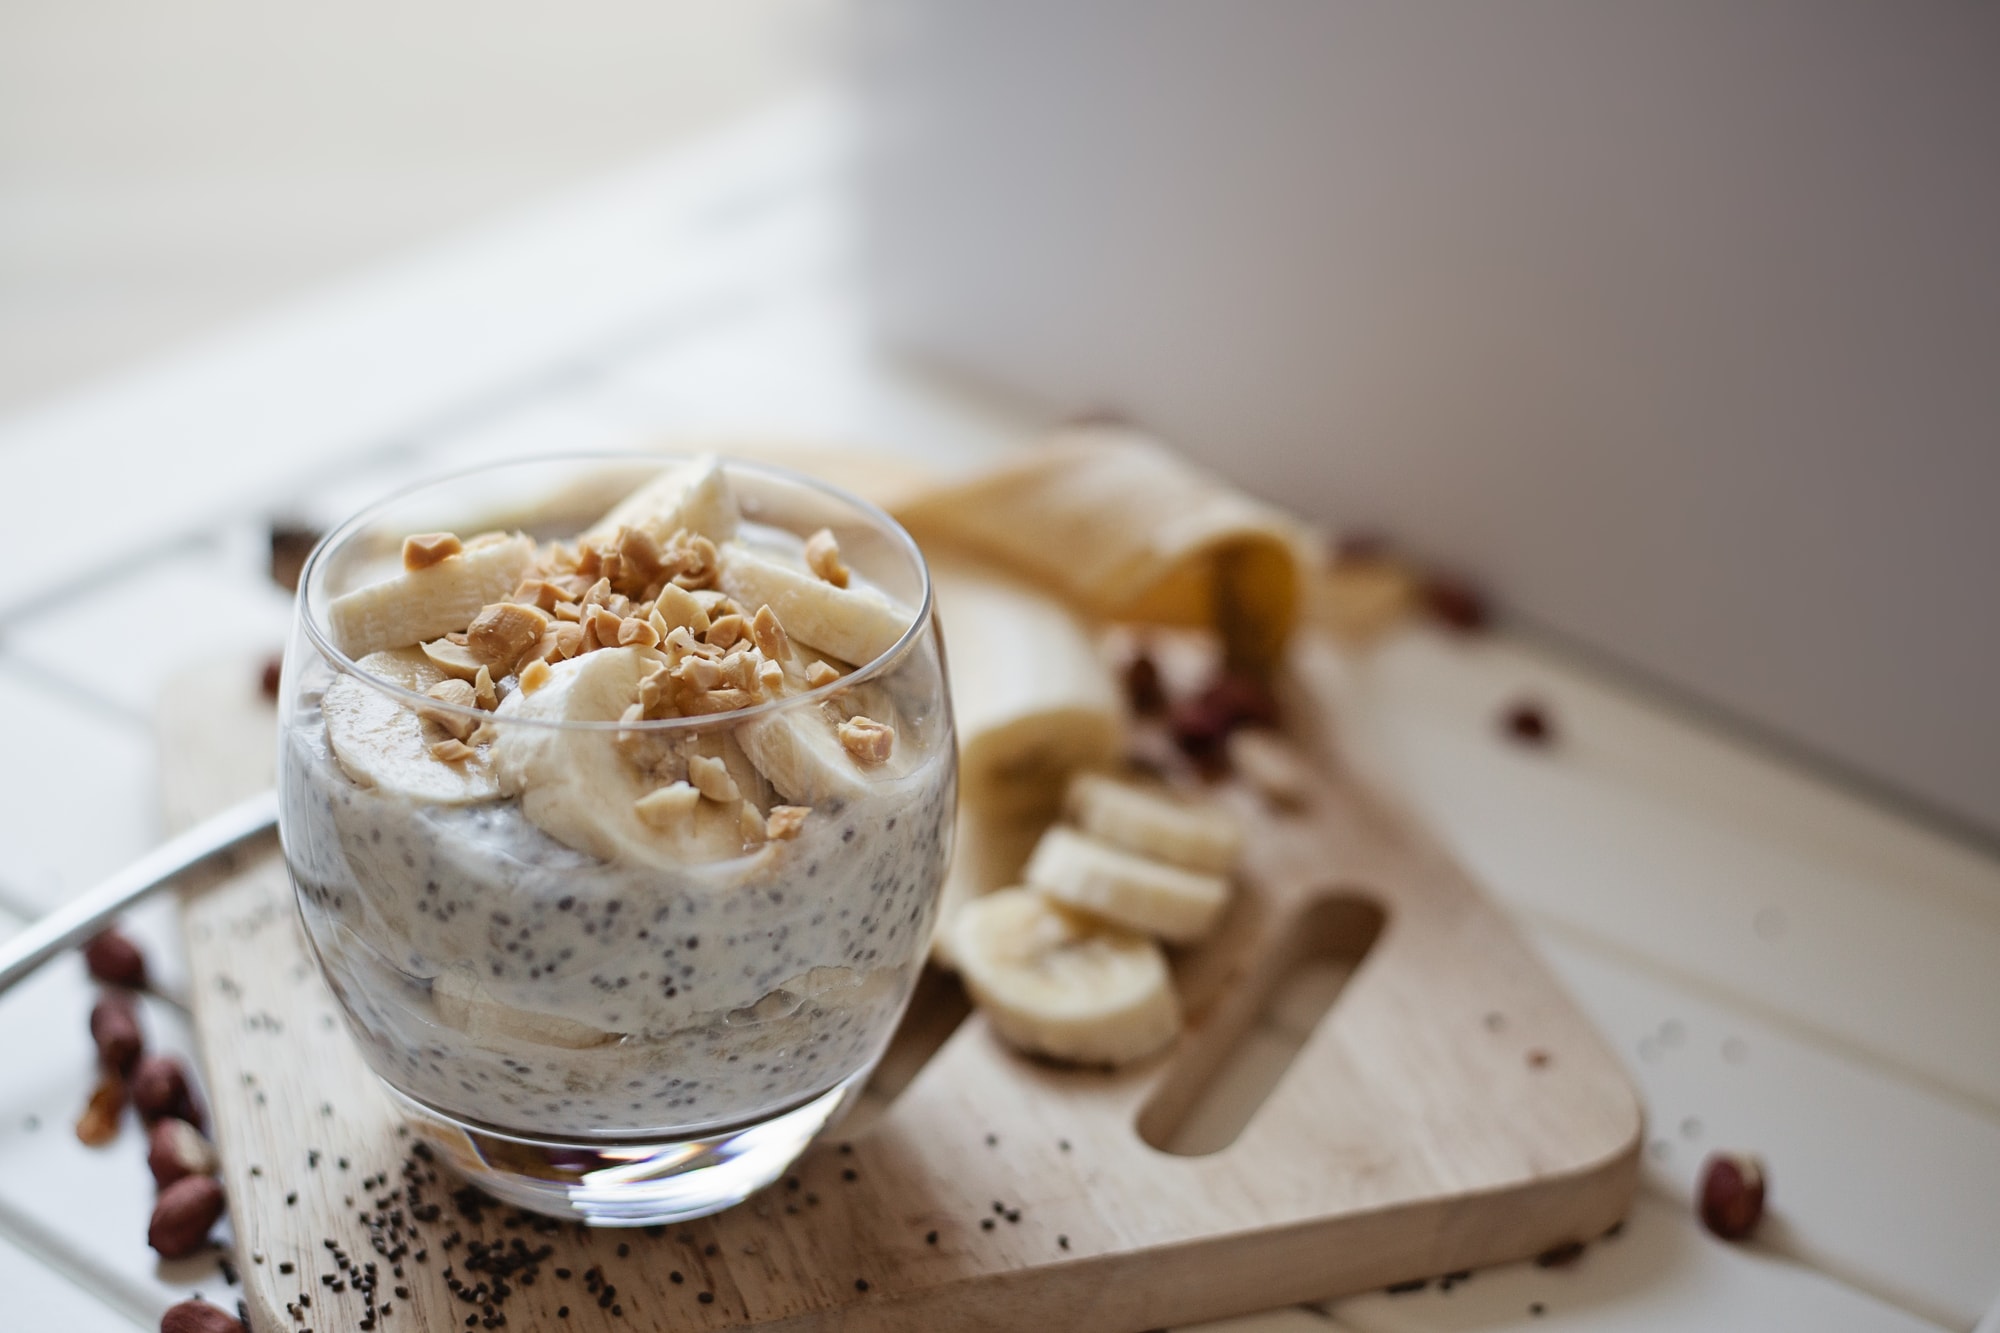 A glass jar of banana and almond butter chia seed pudding.